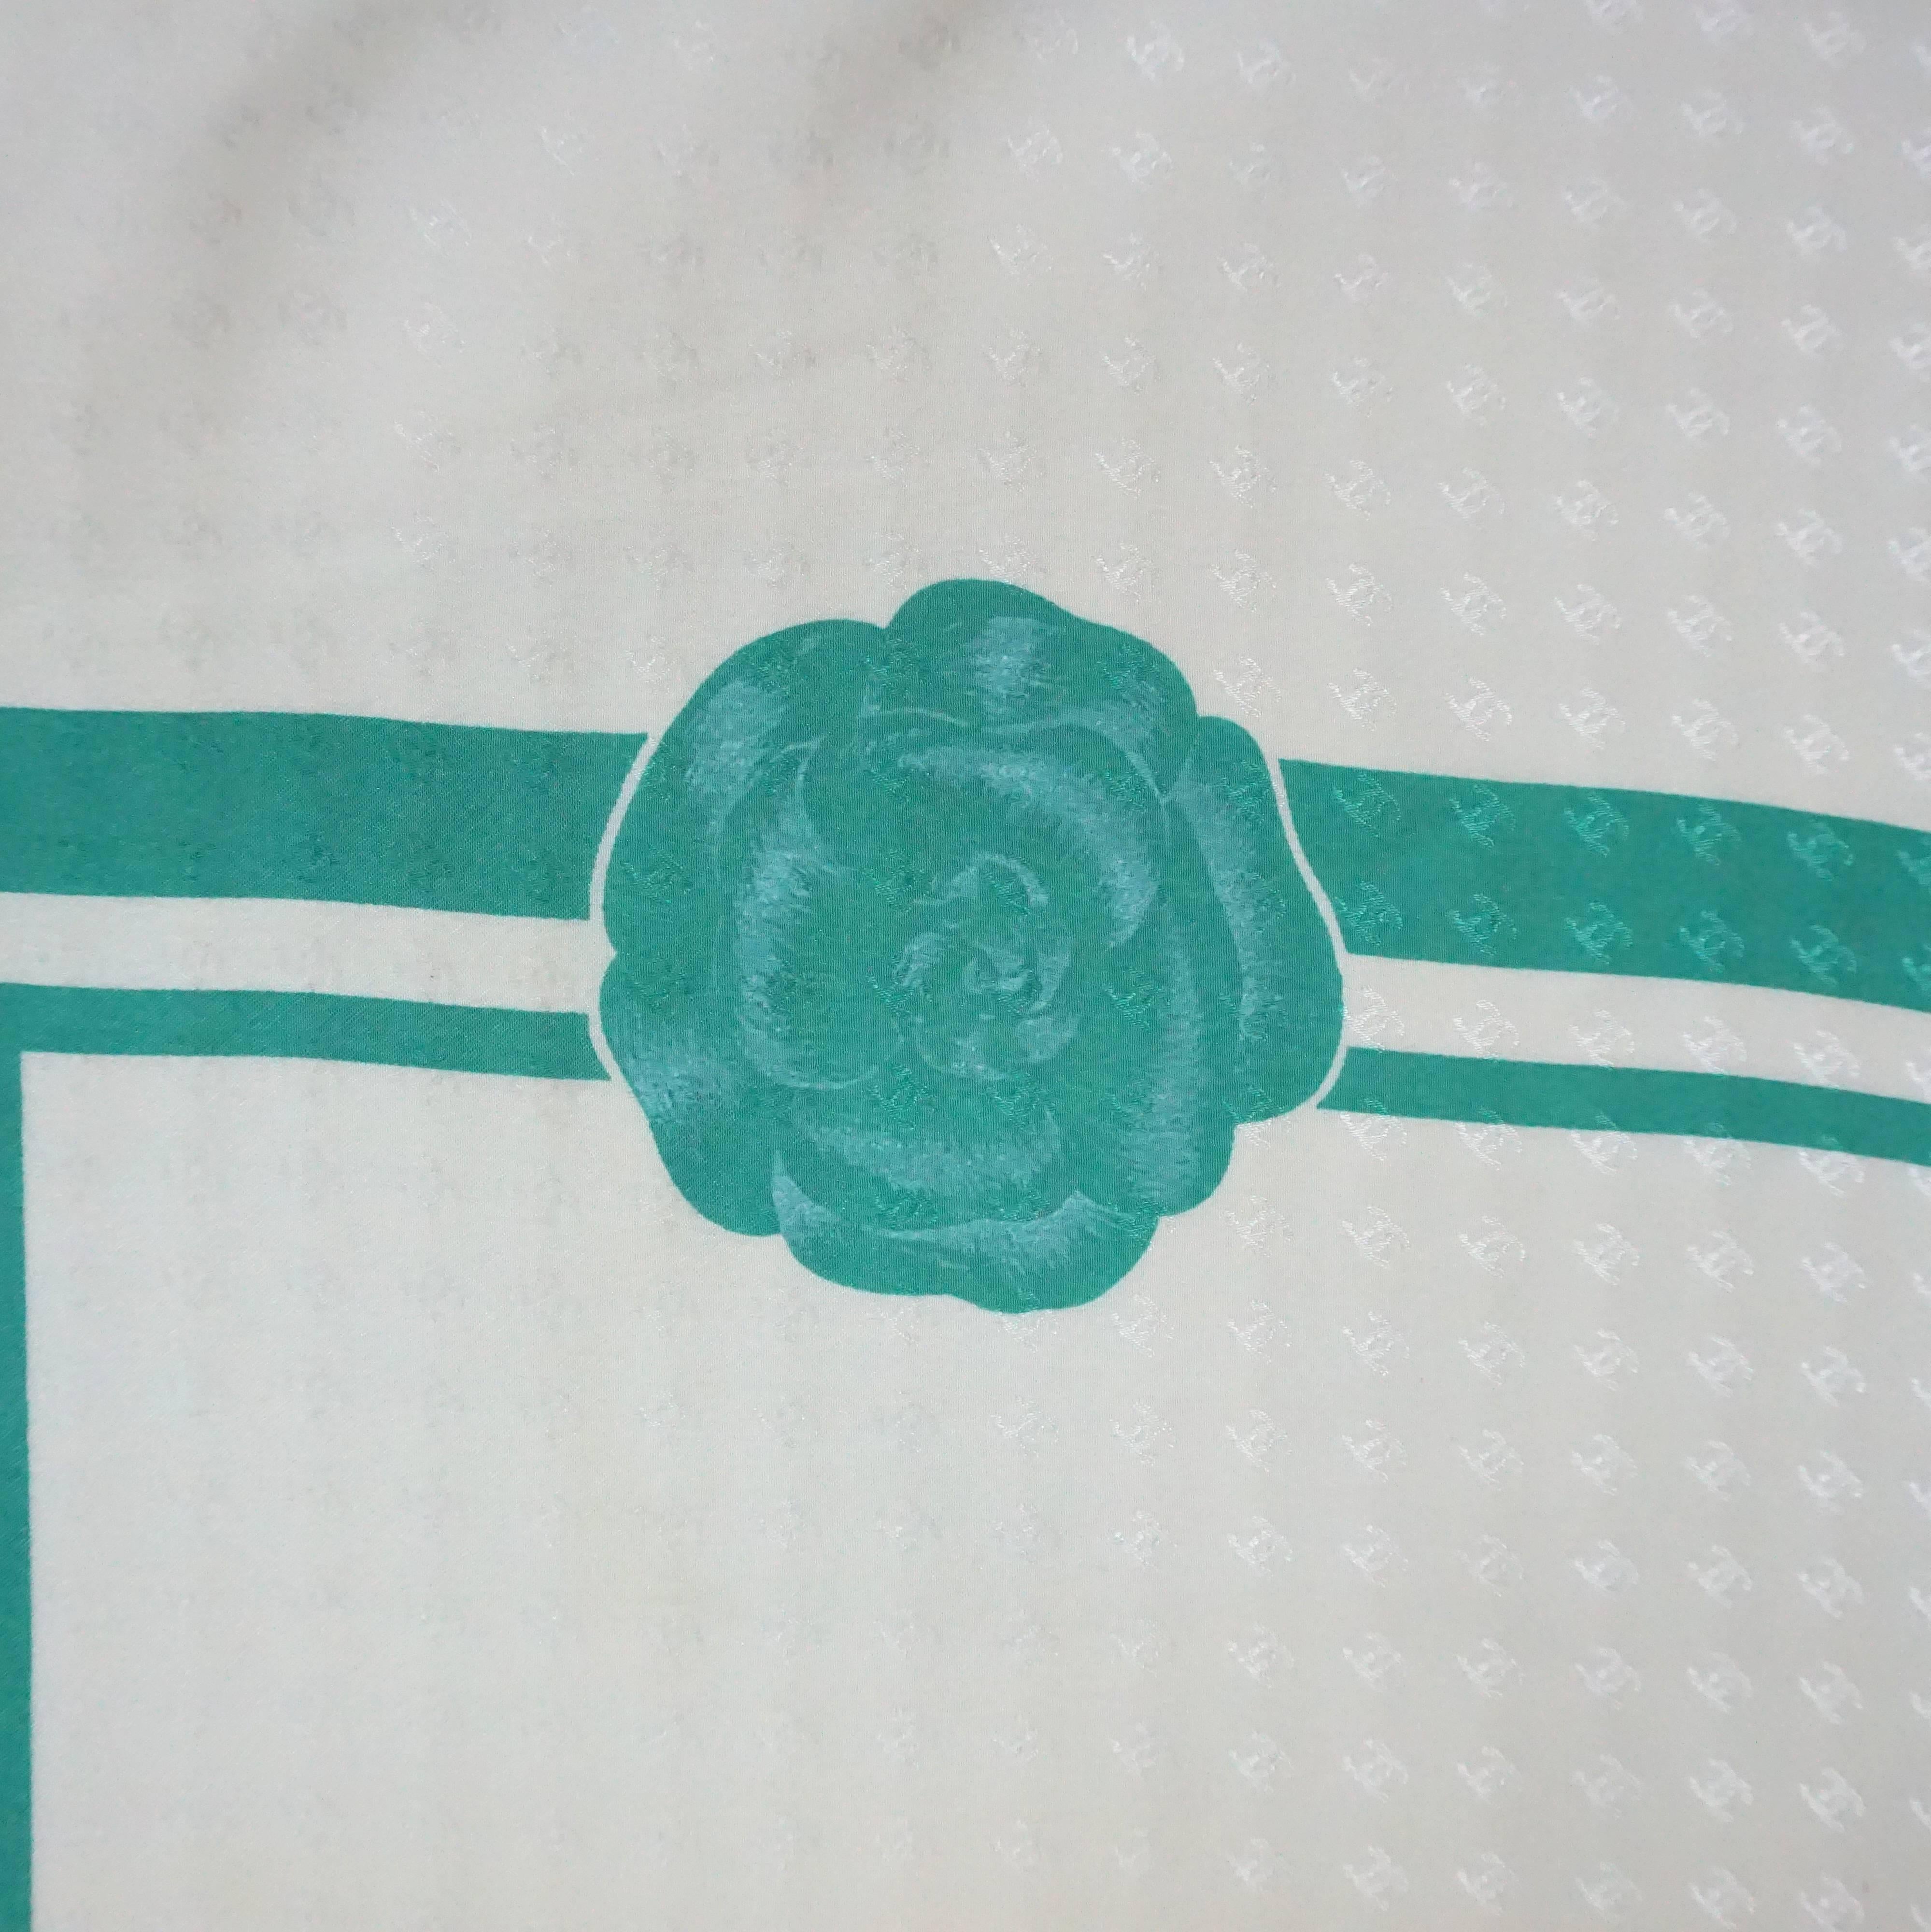 Chanel Ivory & Green Silk Chiffon Motif Scarf - 1990's. This scarf is a beautiful piece. It has a 